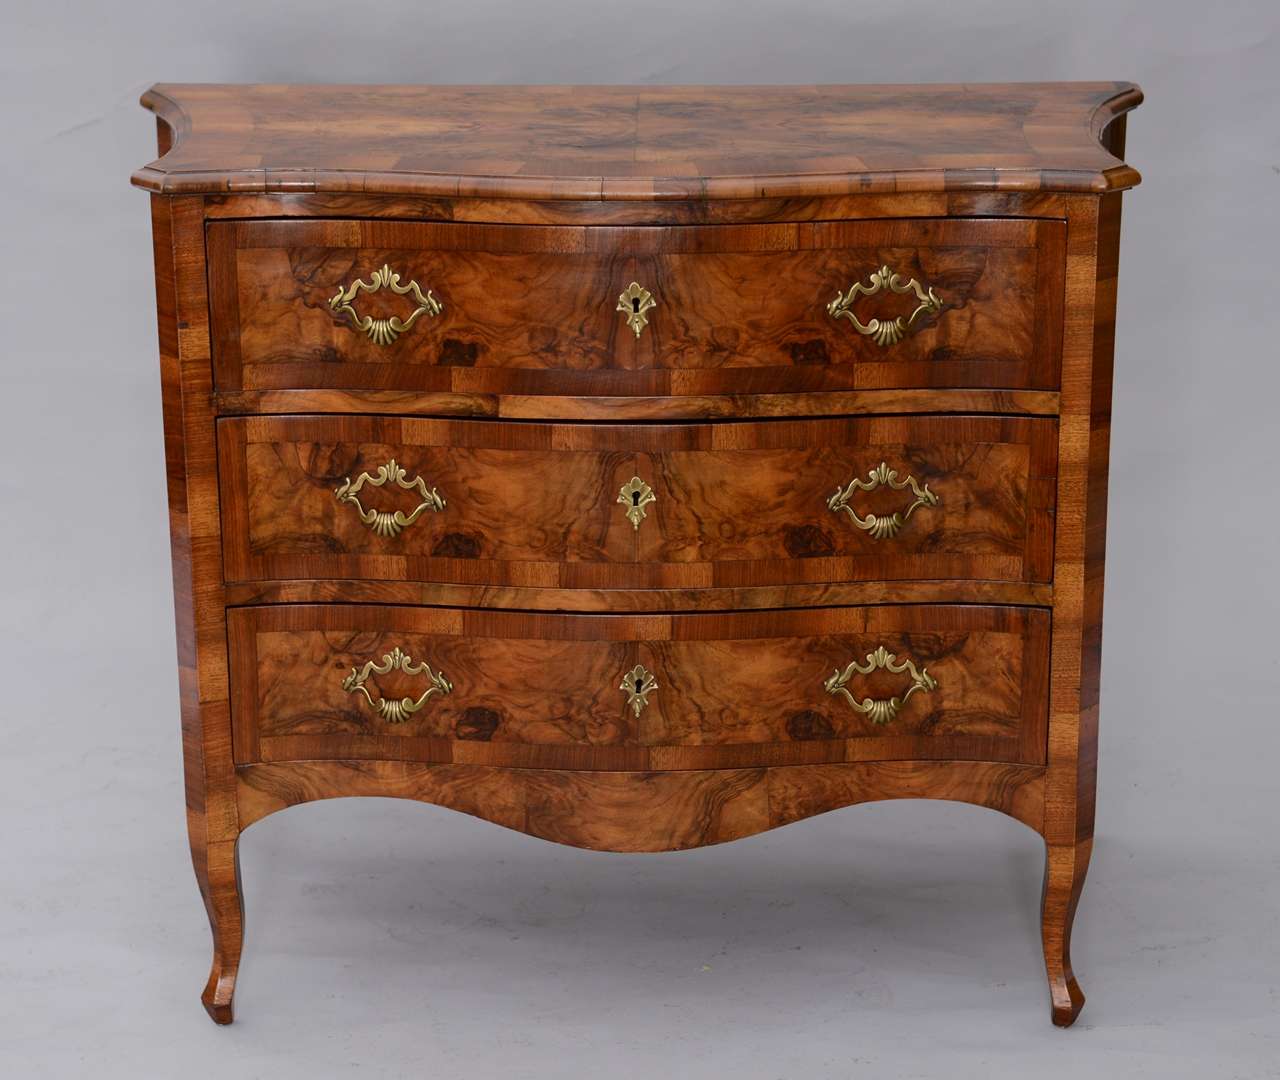 Commode, having an olivewood burl veneer, its shaped and molded top, on conforming case, over three stacked drawers, bowed apron raised on cabriole legs.